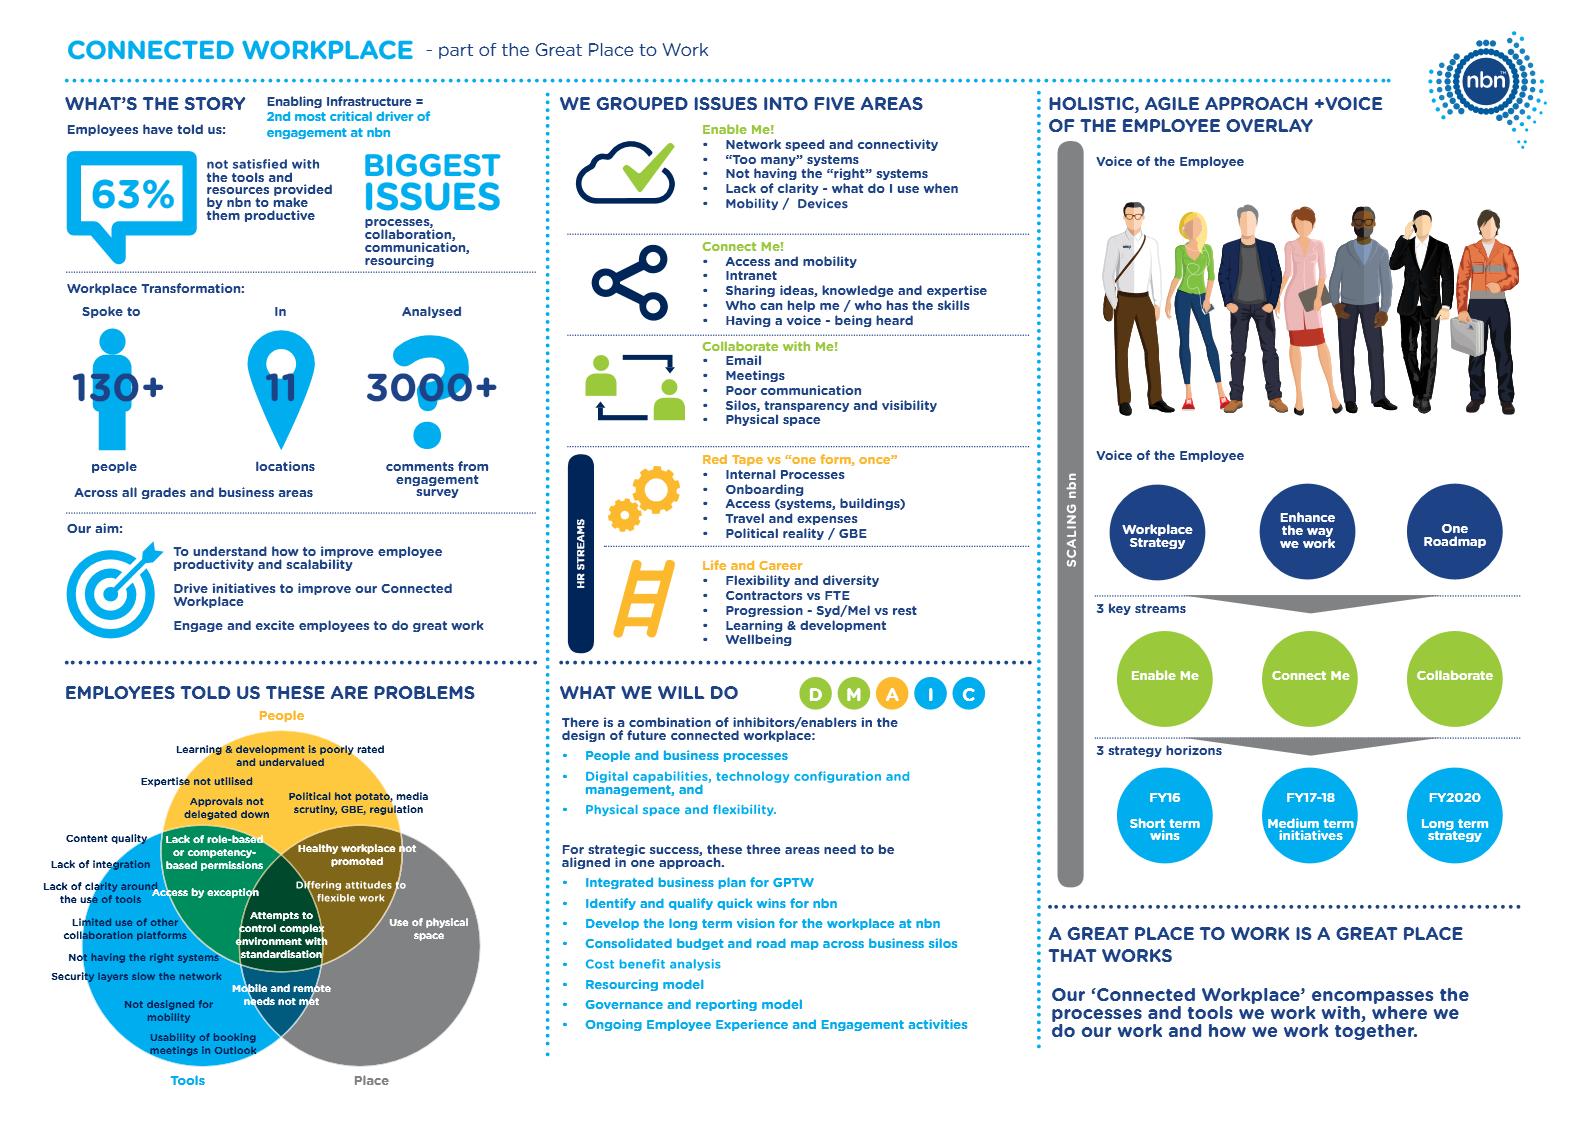 nbn Connected Workplace summary slide 